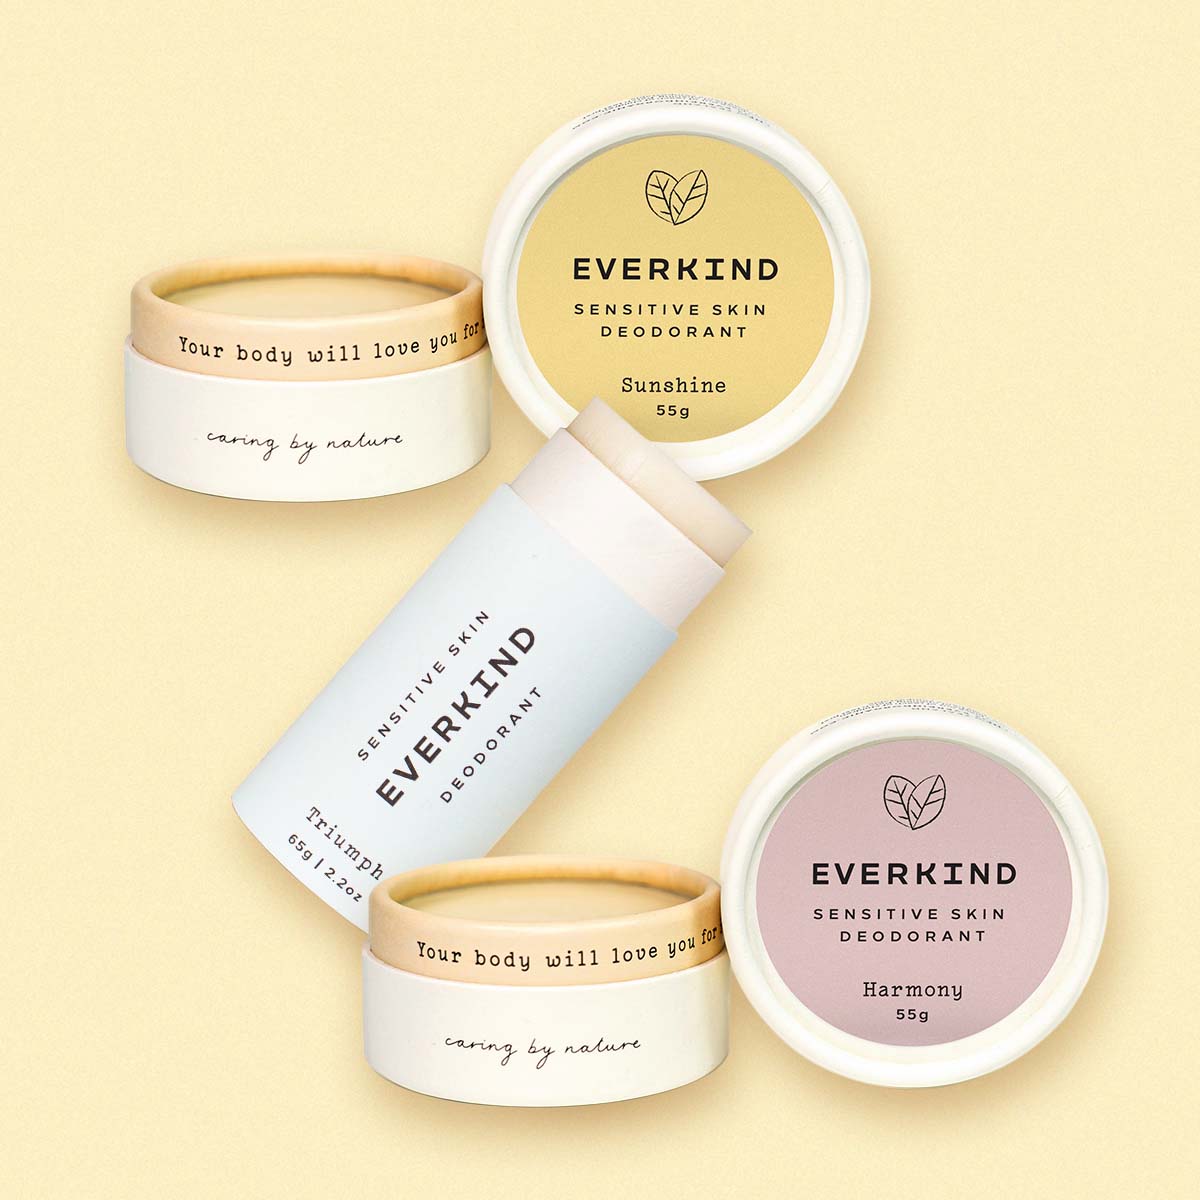 Everkind has a sensitive skin deodorant bundle to care for underarms that can't tolerate sodium bicarbonate. Made with supplement quality marine magnesium Sunshine, Harmony and Triumph are your gentle pick.